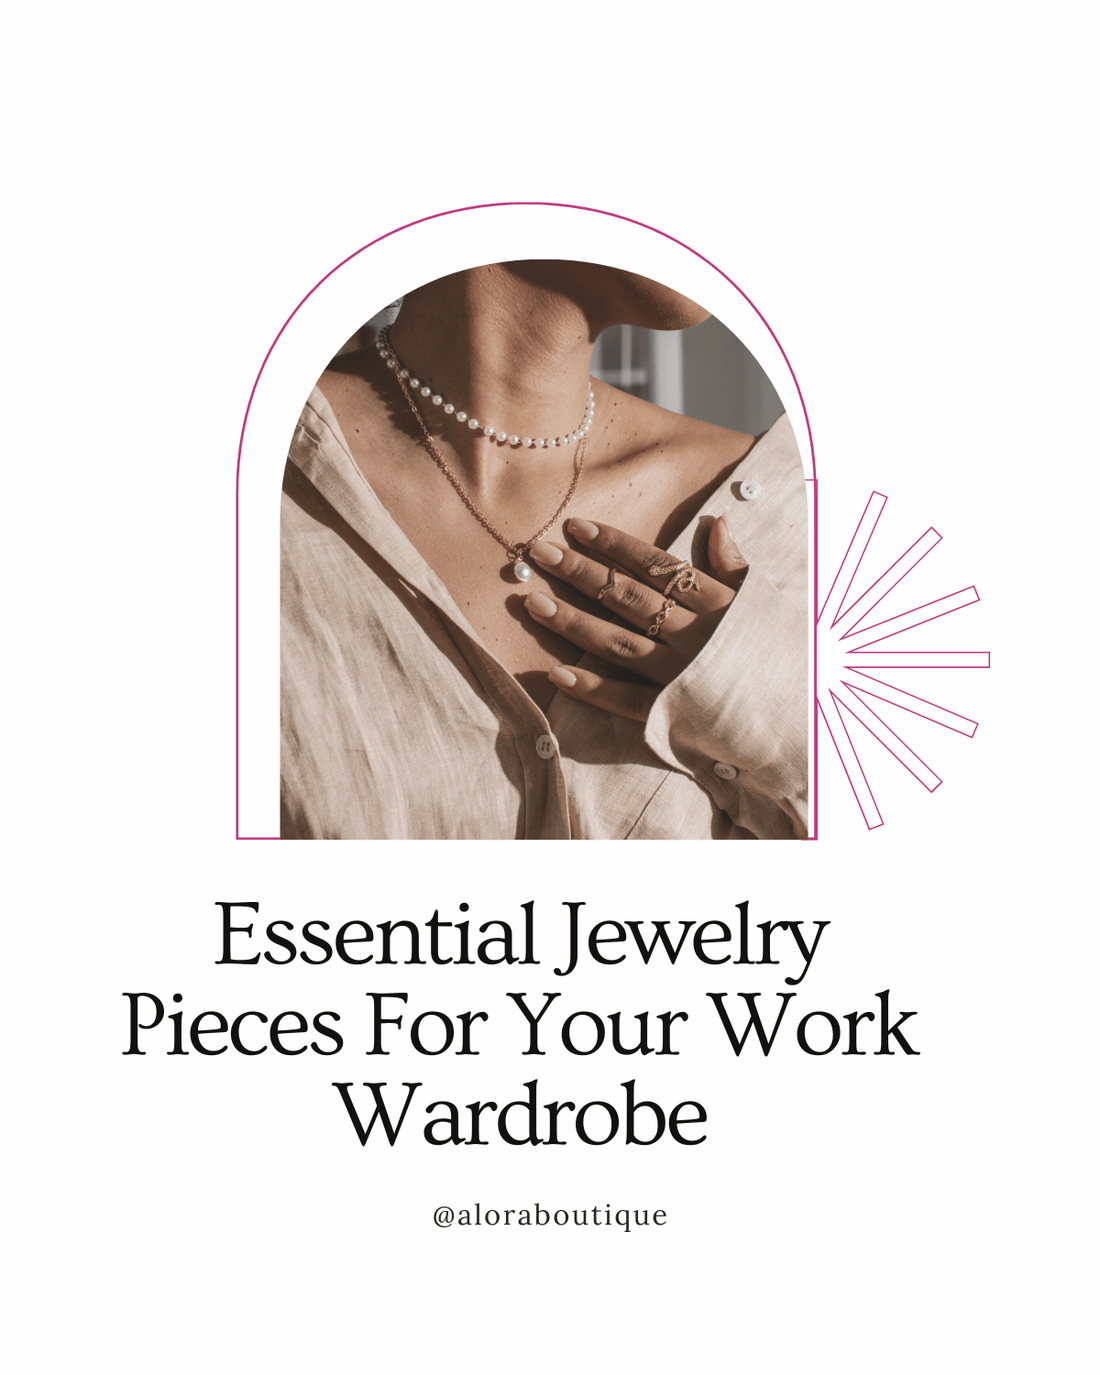 Essential Jewelry Pieces For Your Work Wardrobe | Best Office Jewelry - Alora Boutique